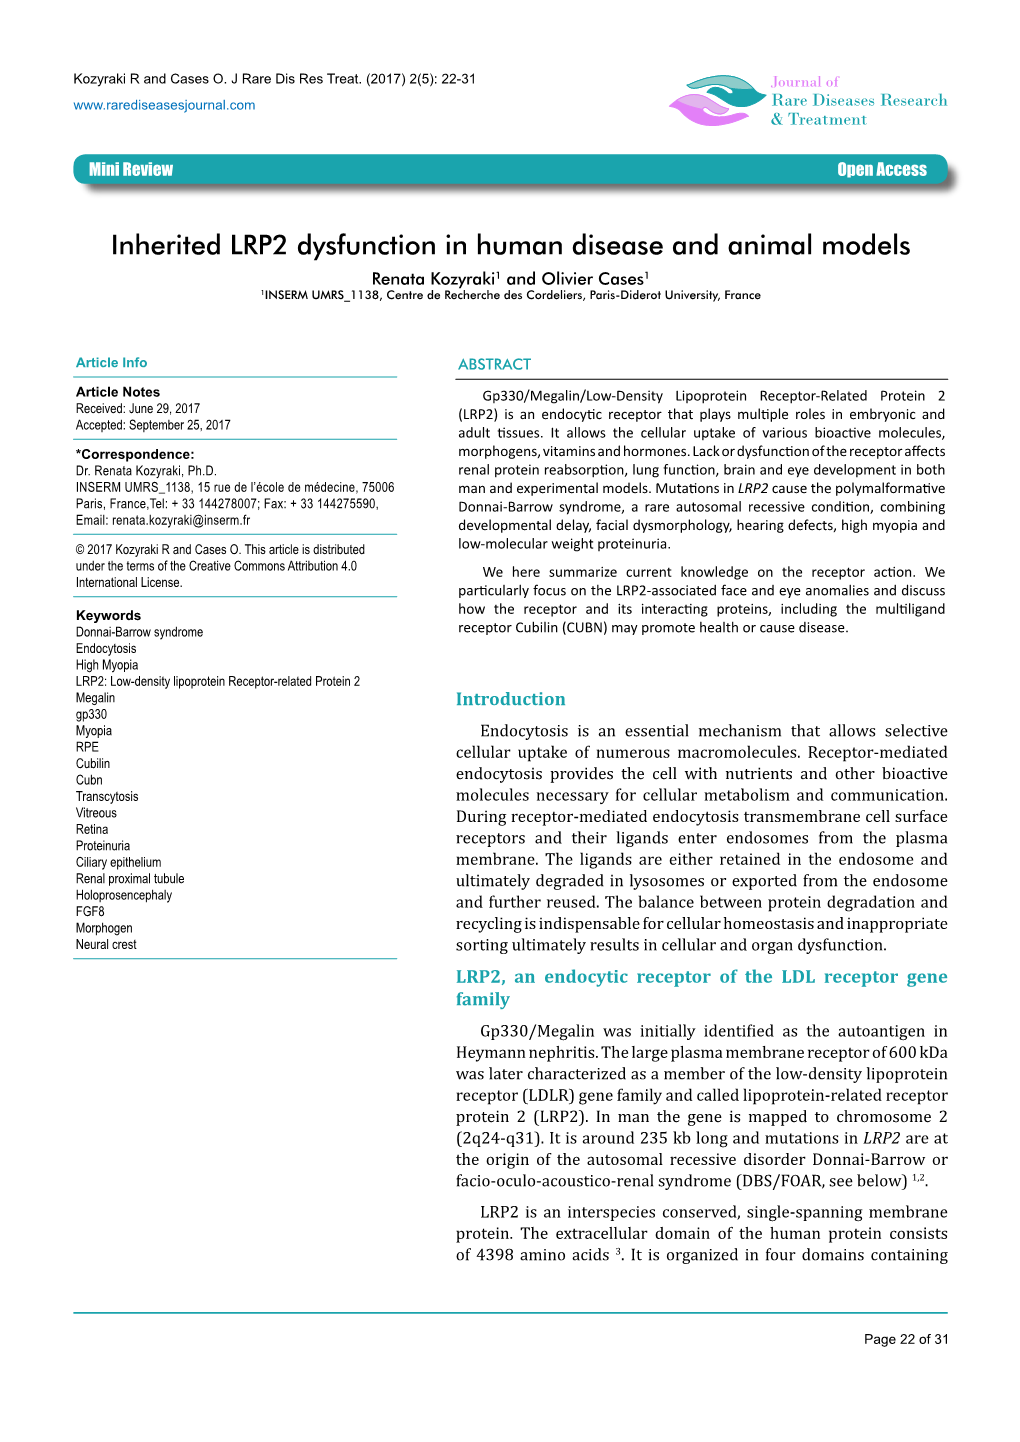 Inherited LRP2 Dysfunction in Human Disease and Animal Models